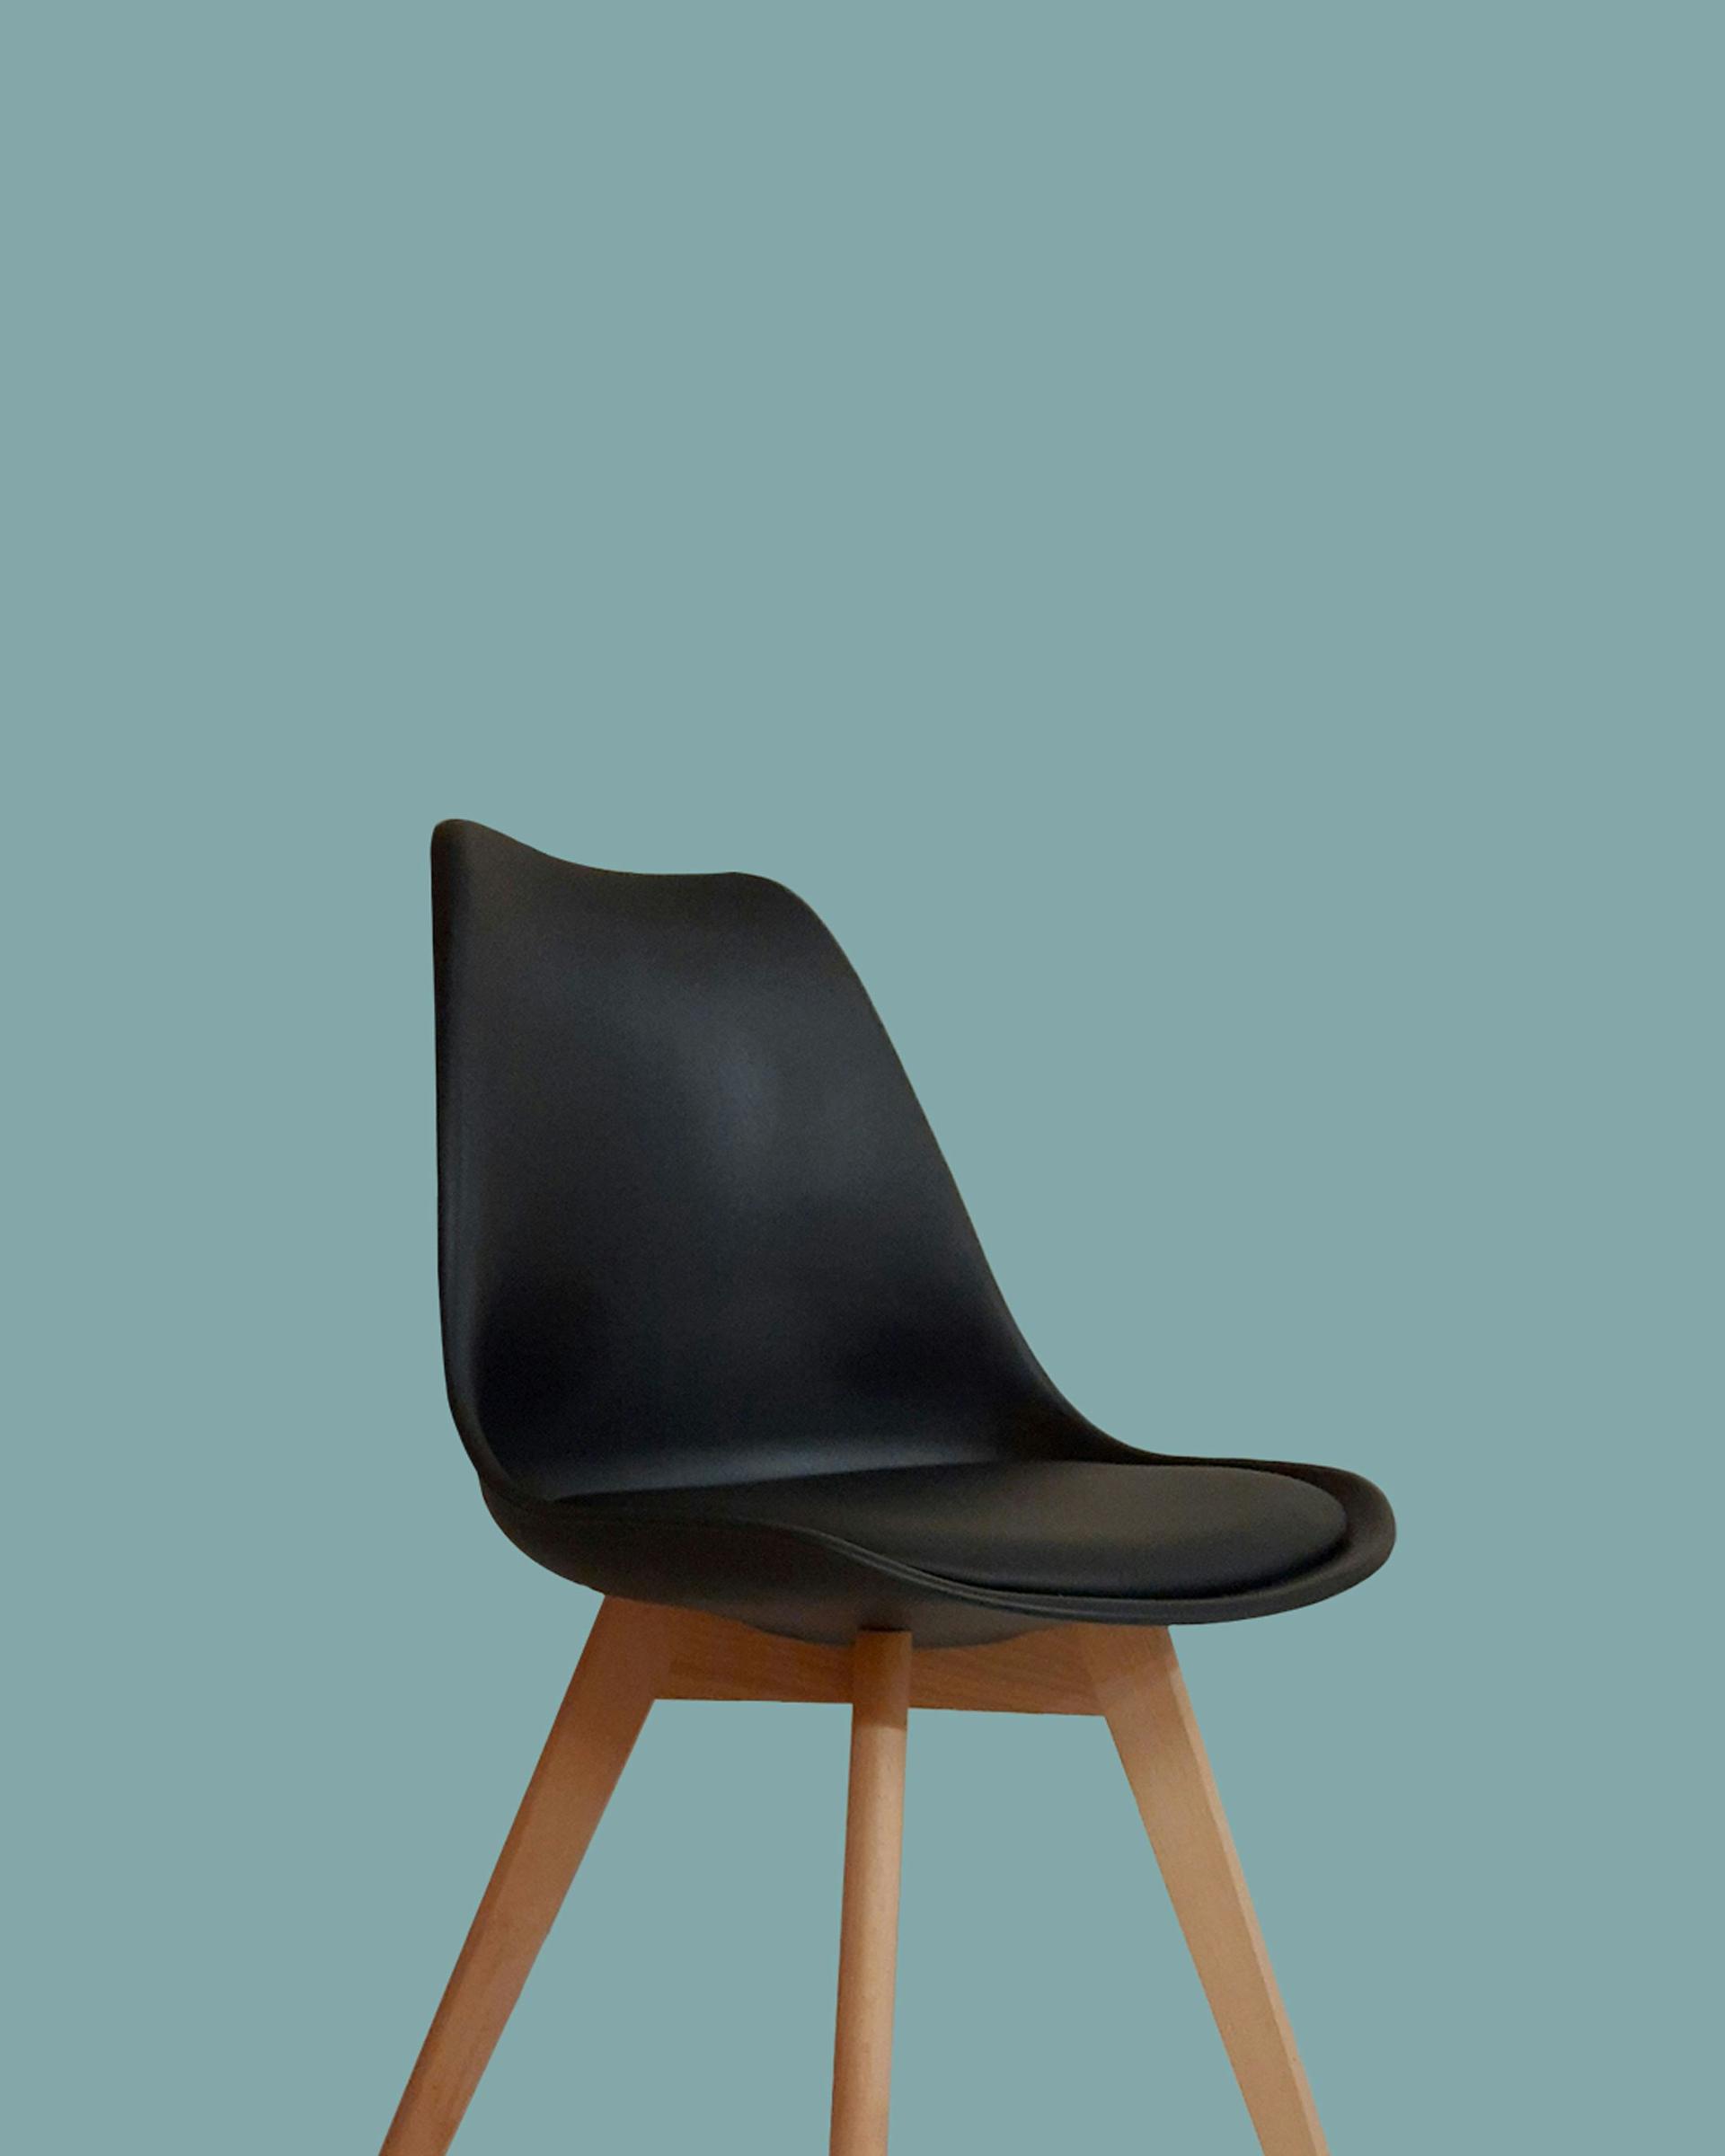 Modern Comfort Meets Timeless Charm: Chair with Wooden Legs